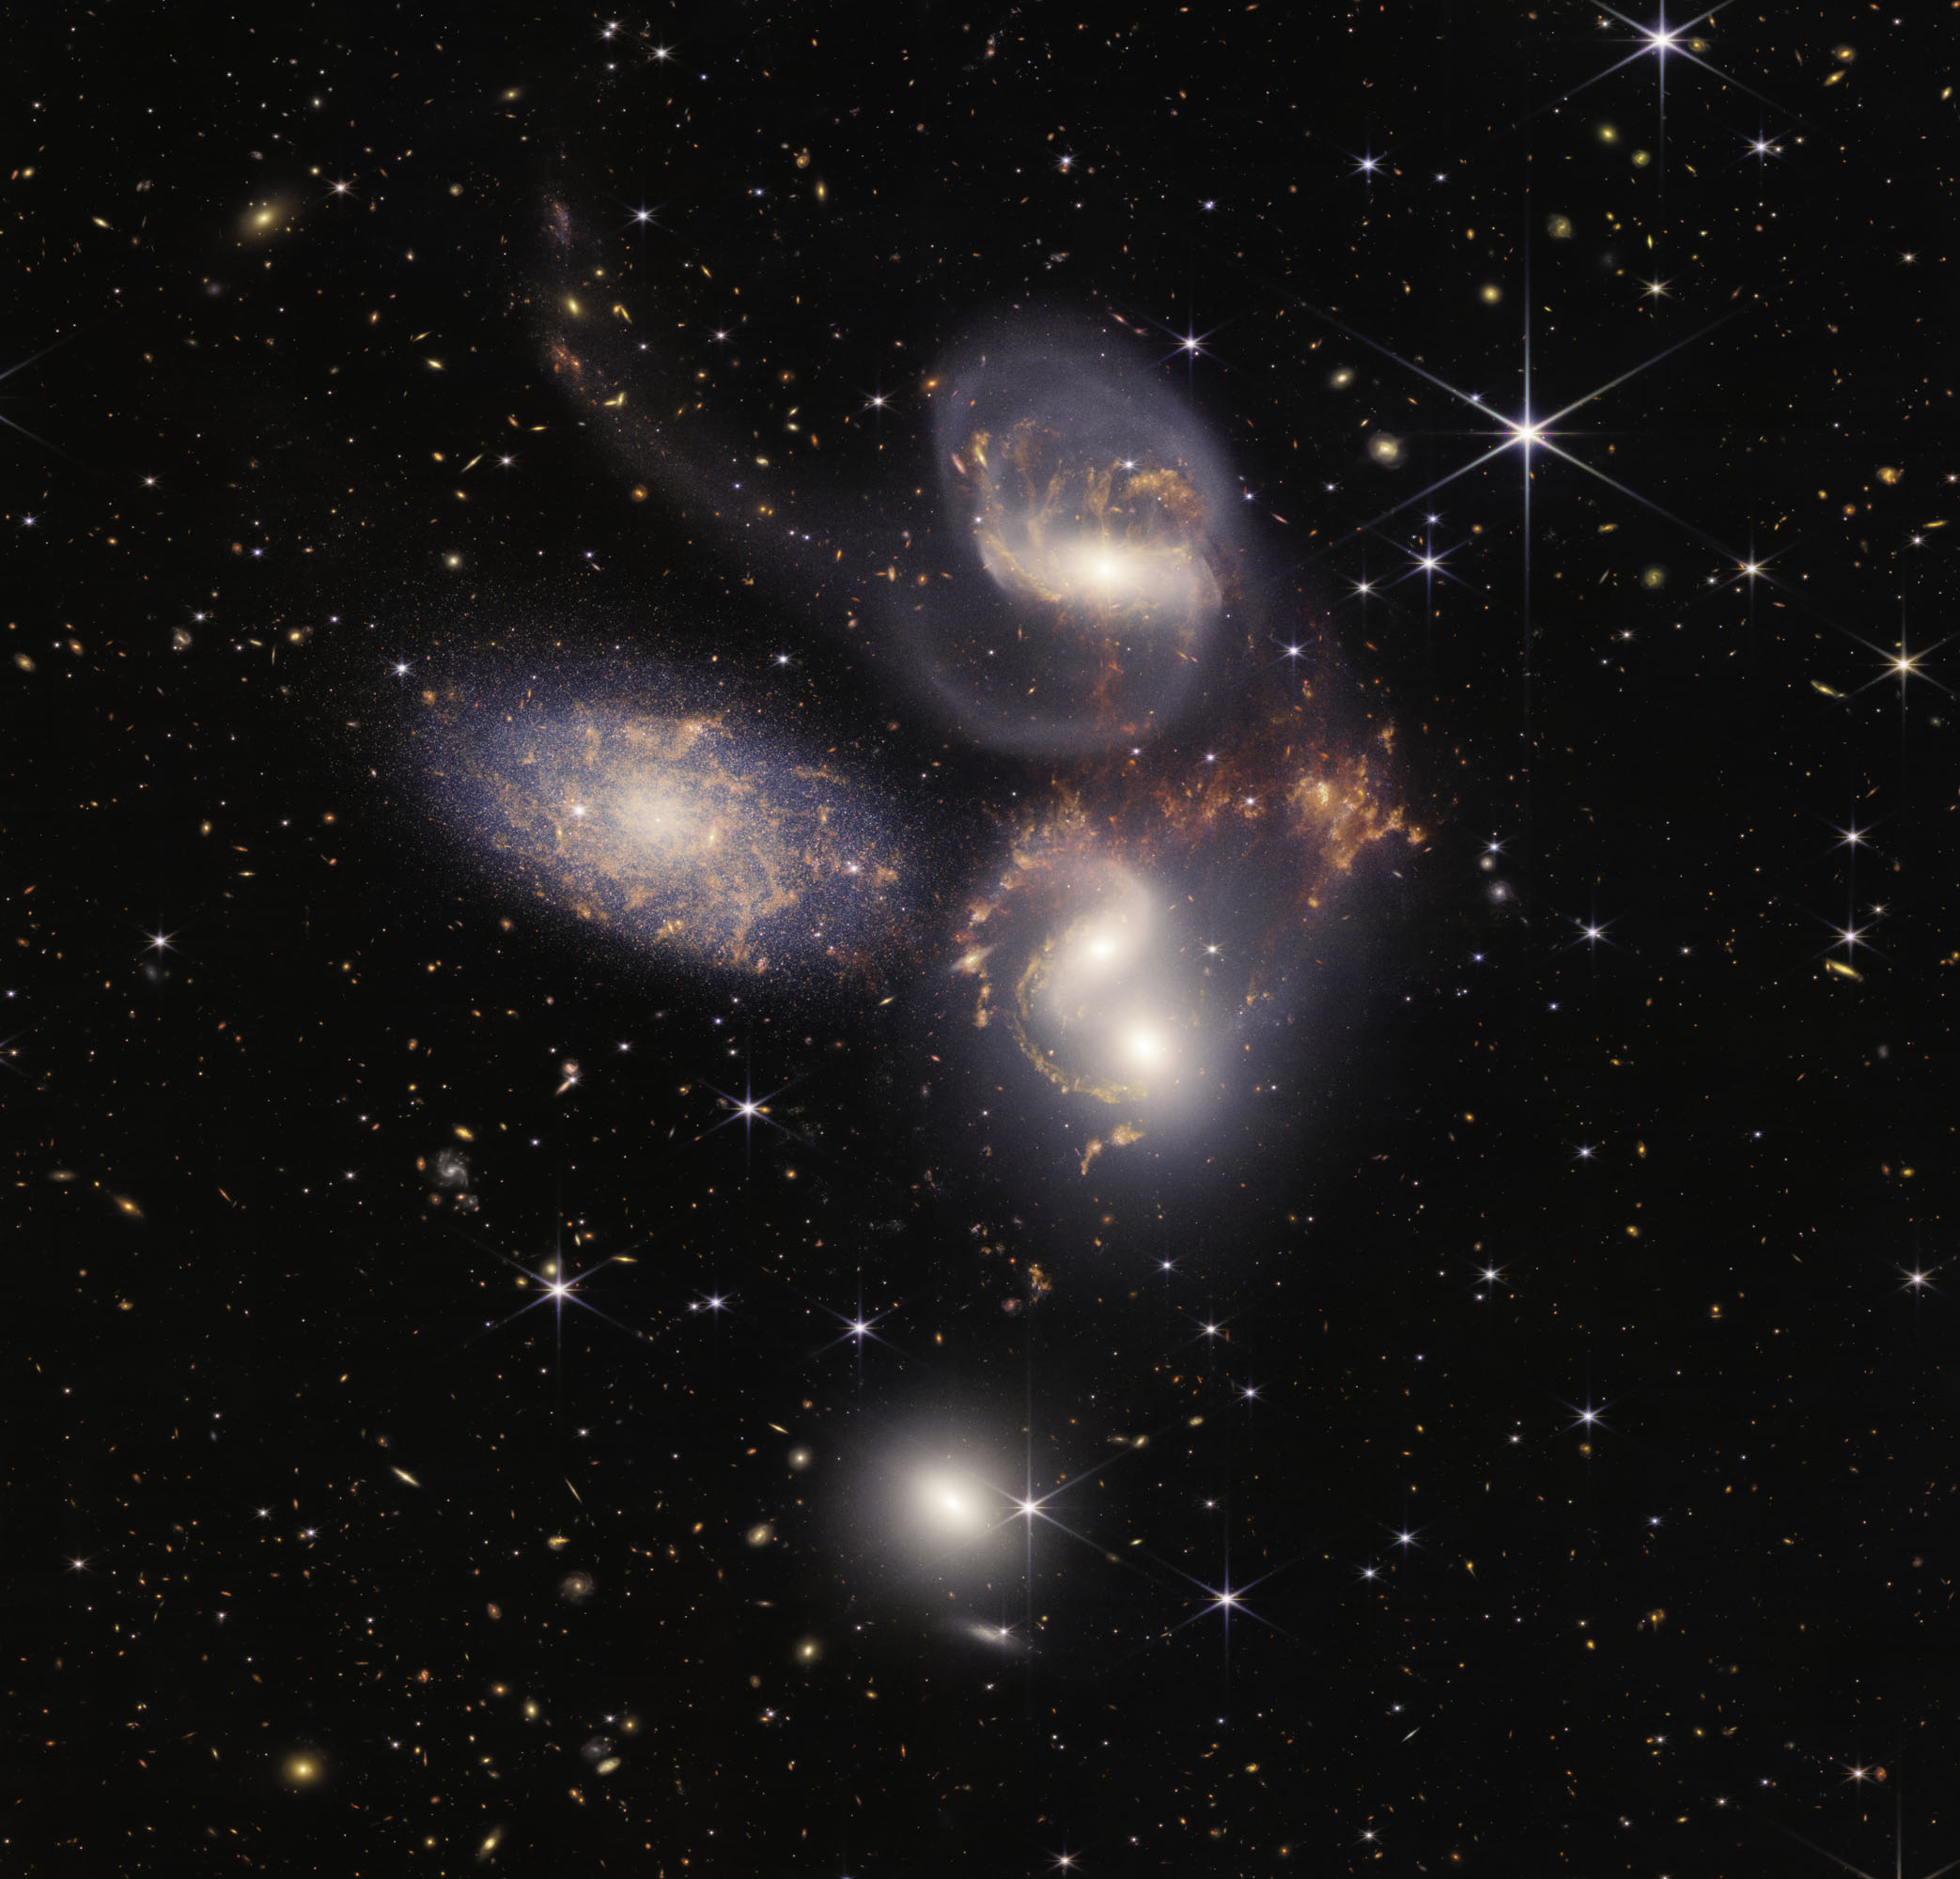 Stephan’s Quintet is a set of five galaxies. The leftmost one is actually in the foreground, and the other 4 are very close together. So close that they are what we call “interacting” – they are pulling on each other, with the two center right actually merging into one galaxy. These interactions cause lots of stars to be formed, as the gas they are made out of is churned around.